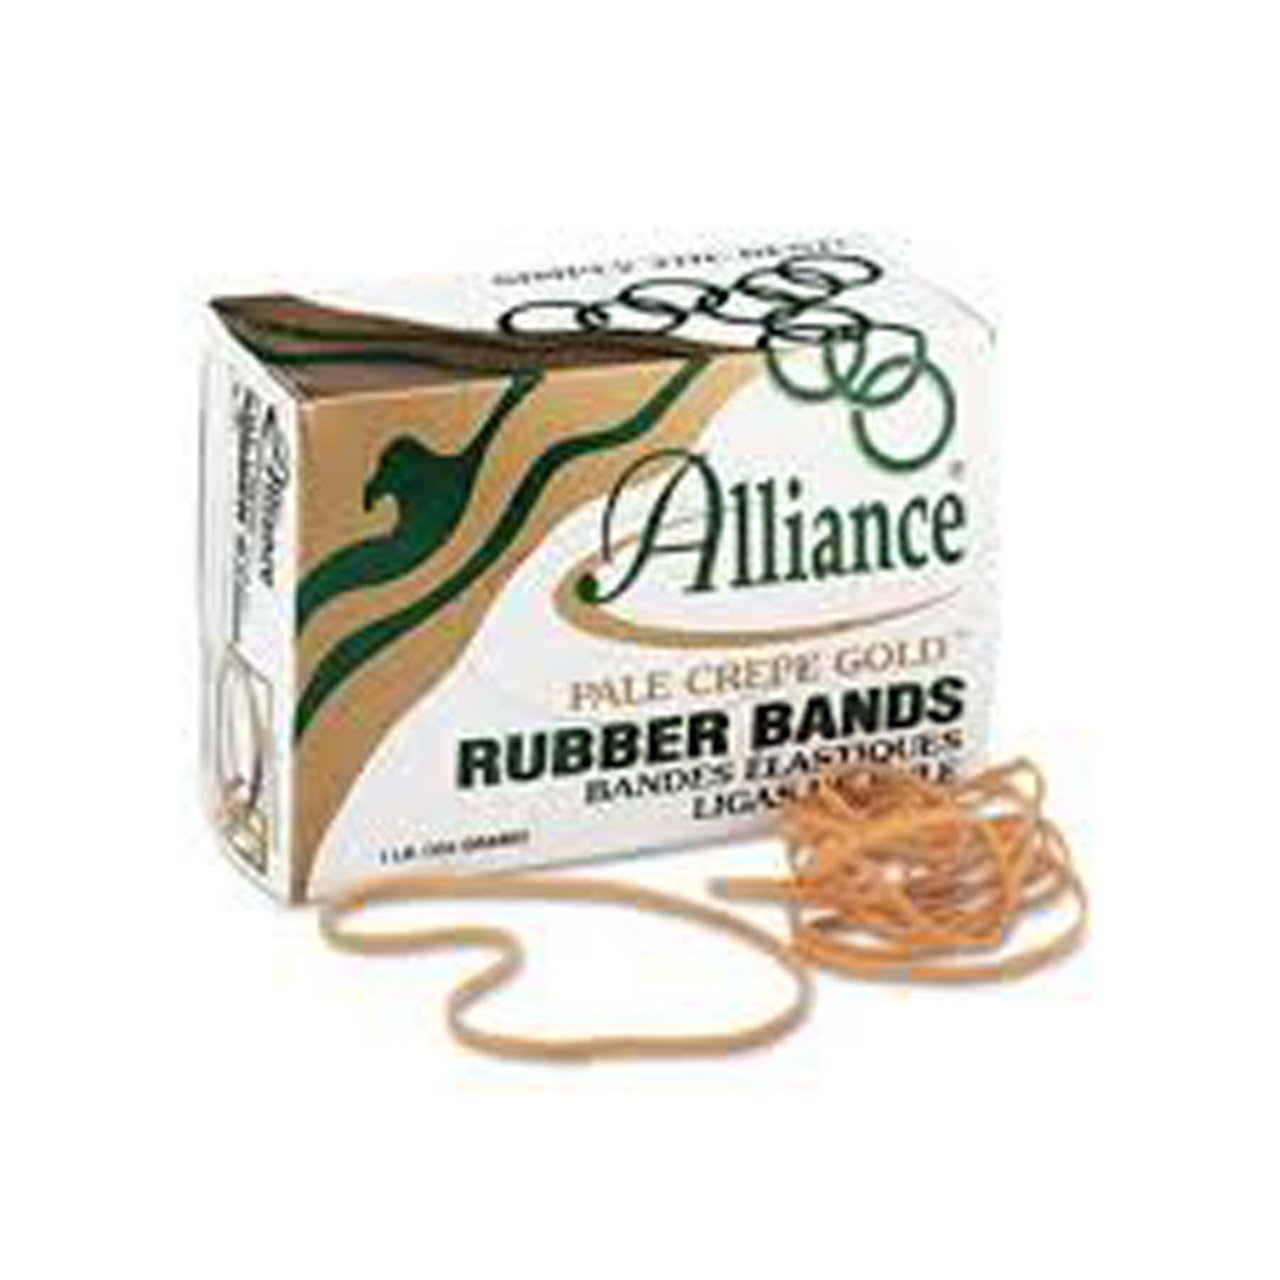 #33 Rubber Bands, 1 Lb Box Plate Crepe Gold (970)